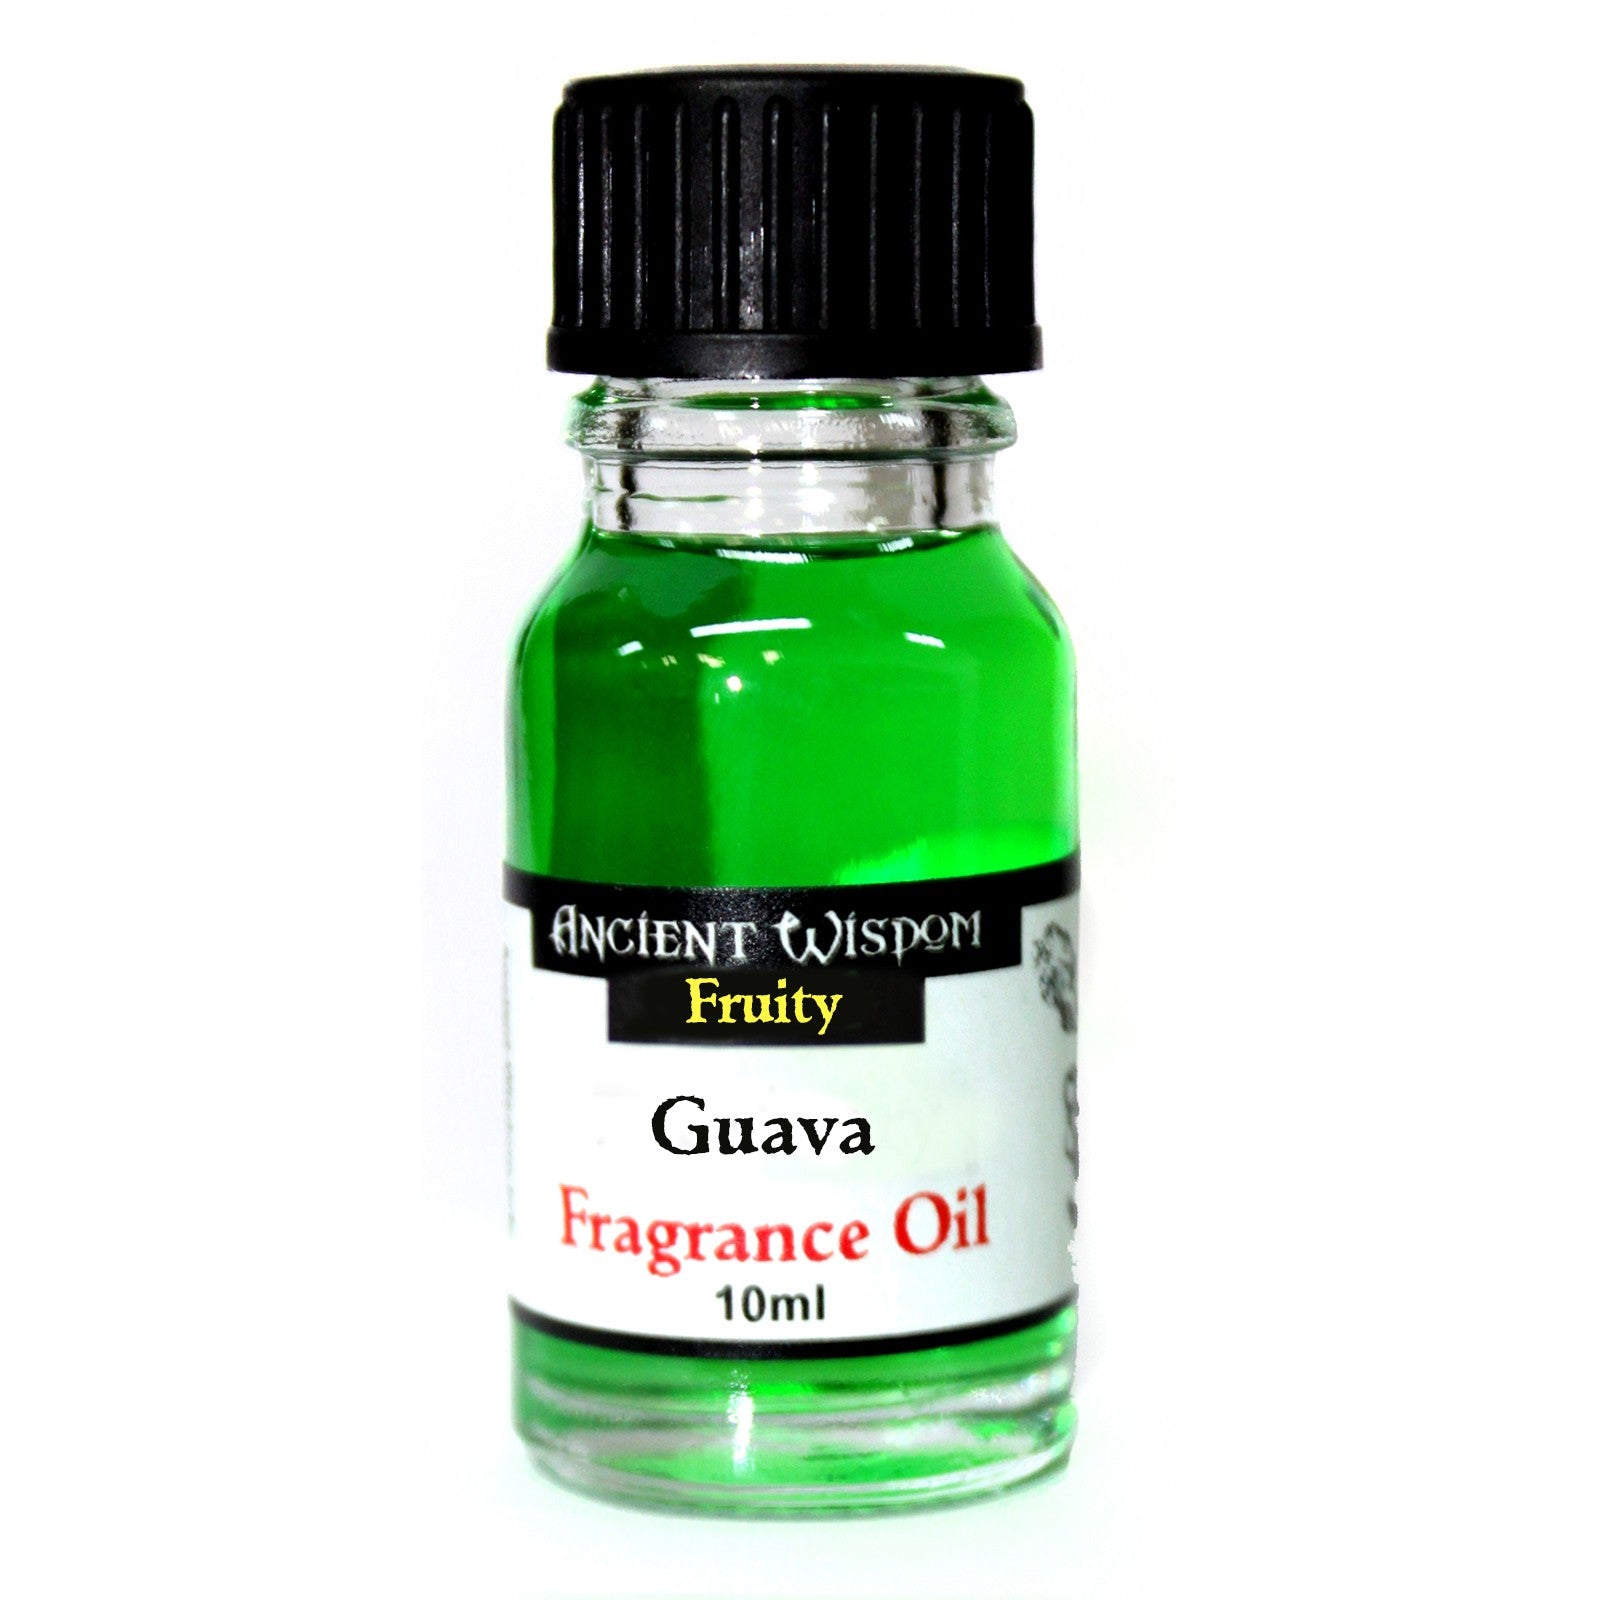 View 10ml Guava Fragrance Oil information